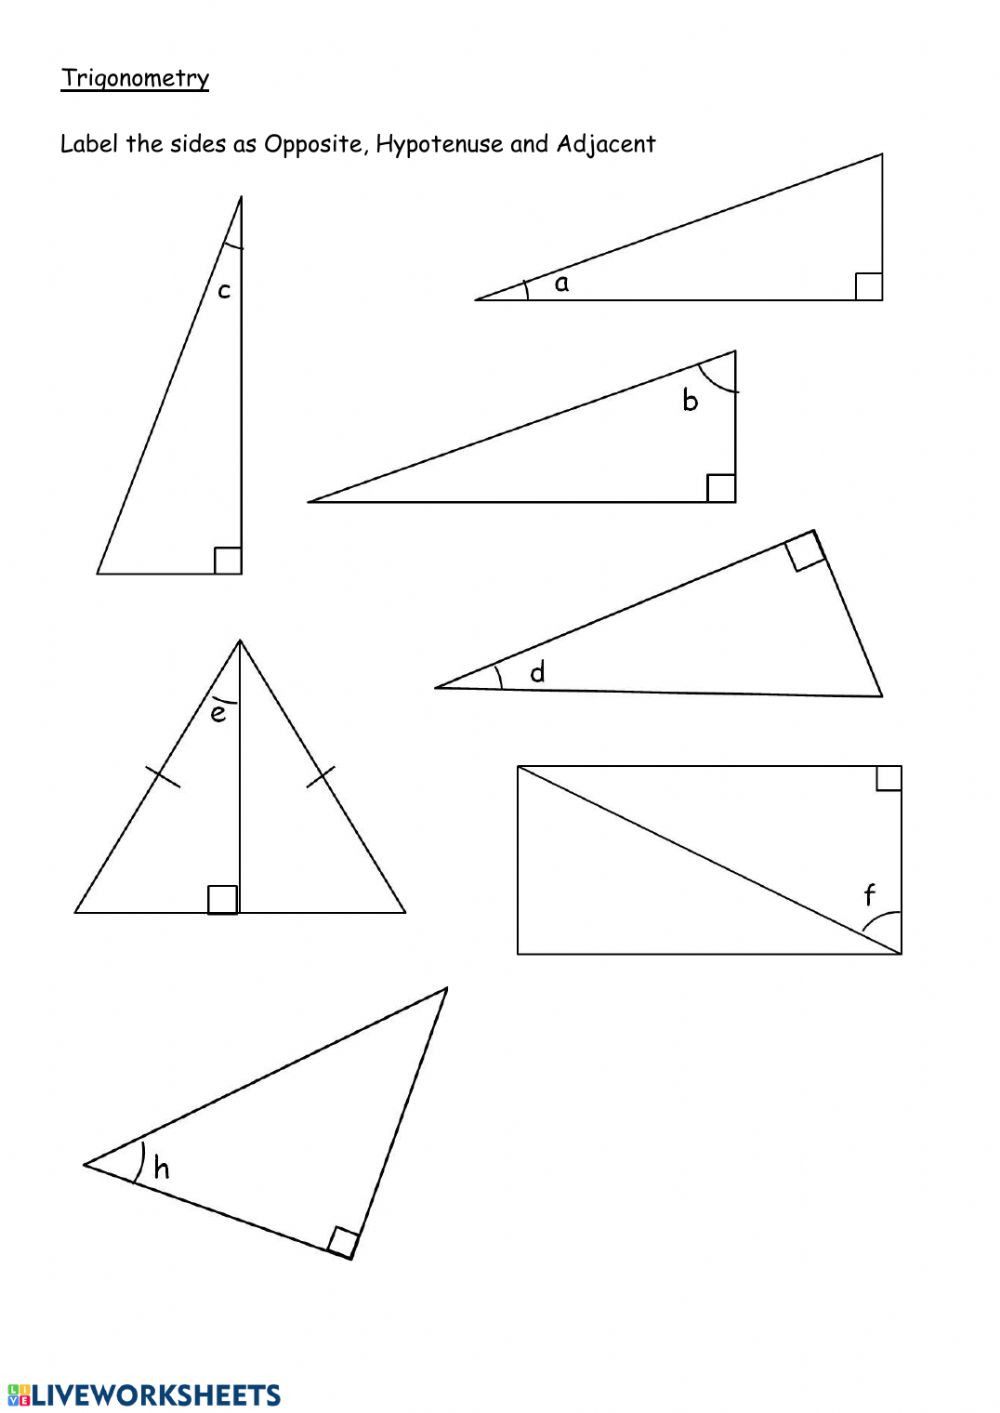 Right Triangle Trig Worksheet Answers Label Sides In Right Angle Triangles Interactive Worksheet